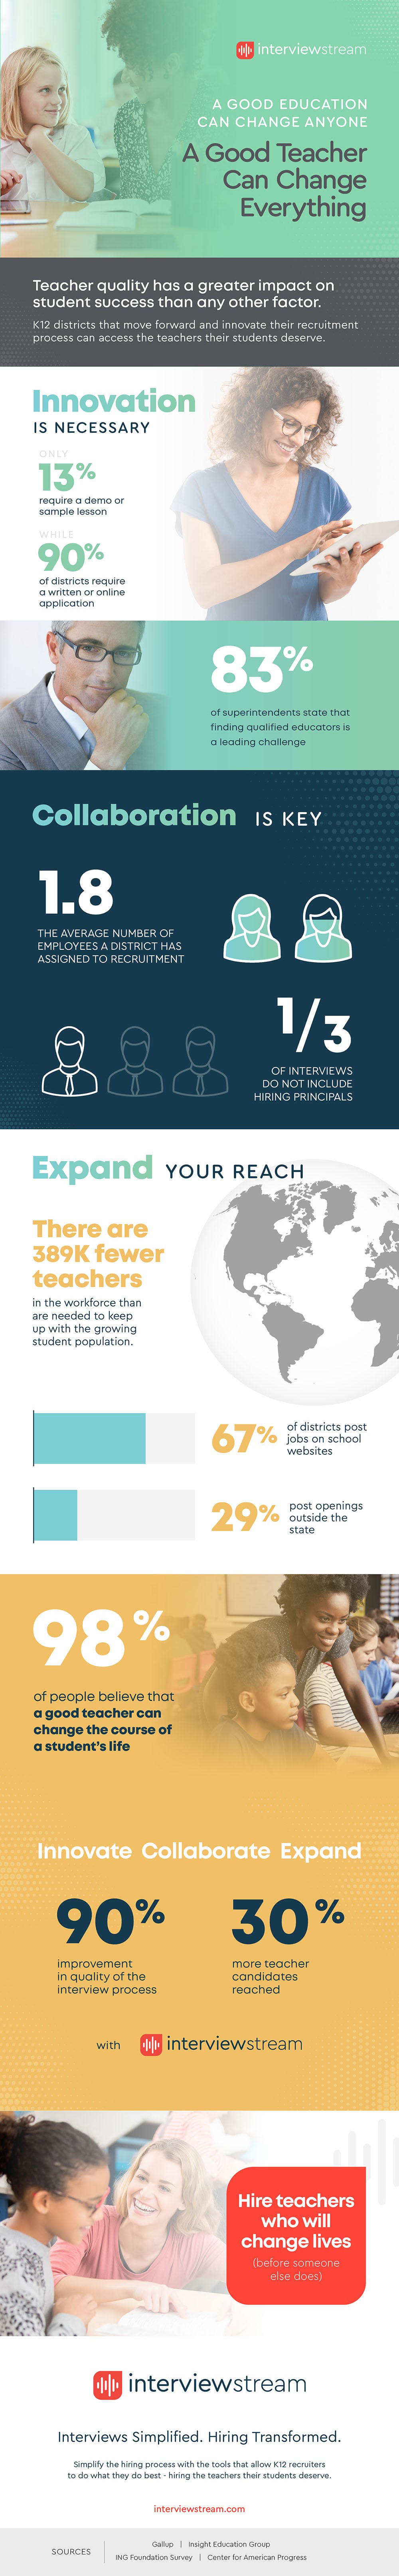 Infographic that explores the challenges school districts face to recruit and hire quality teachers